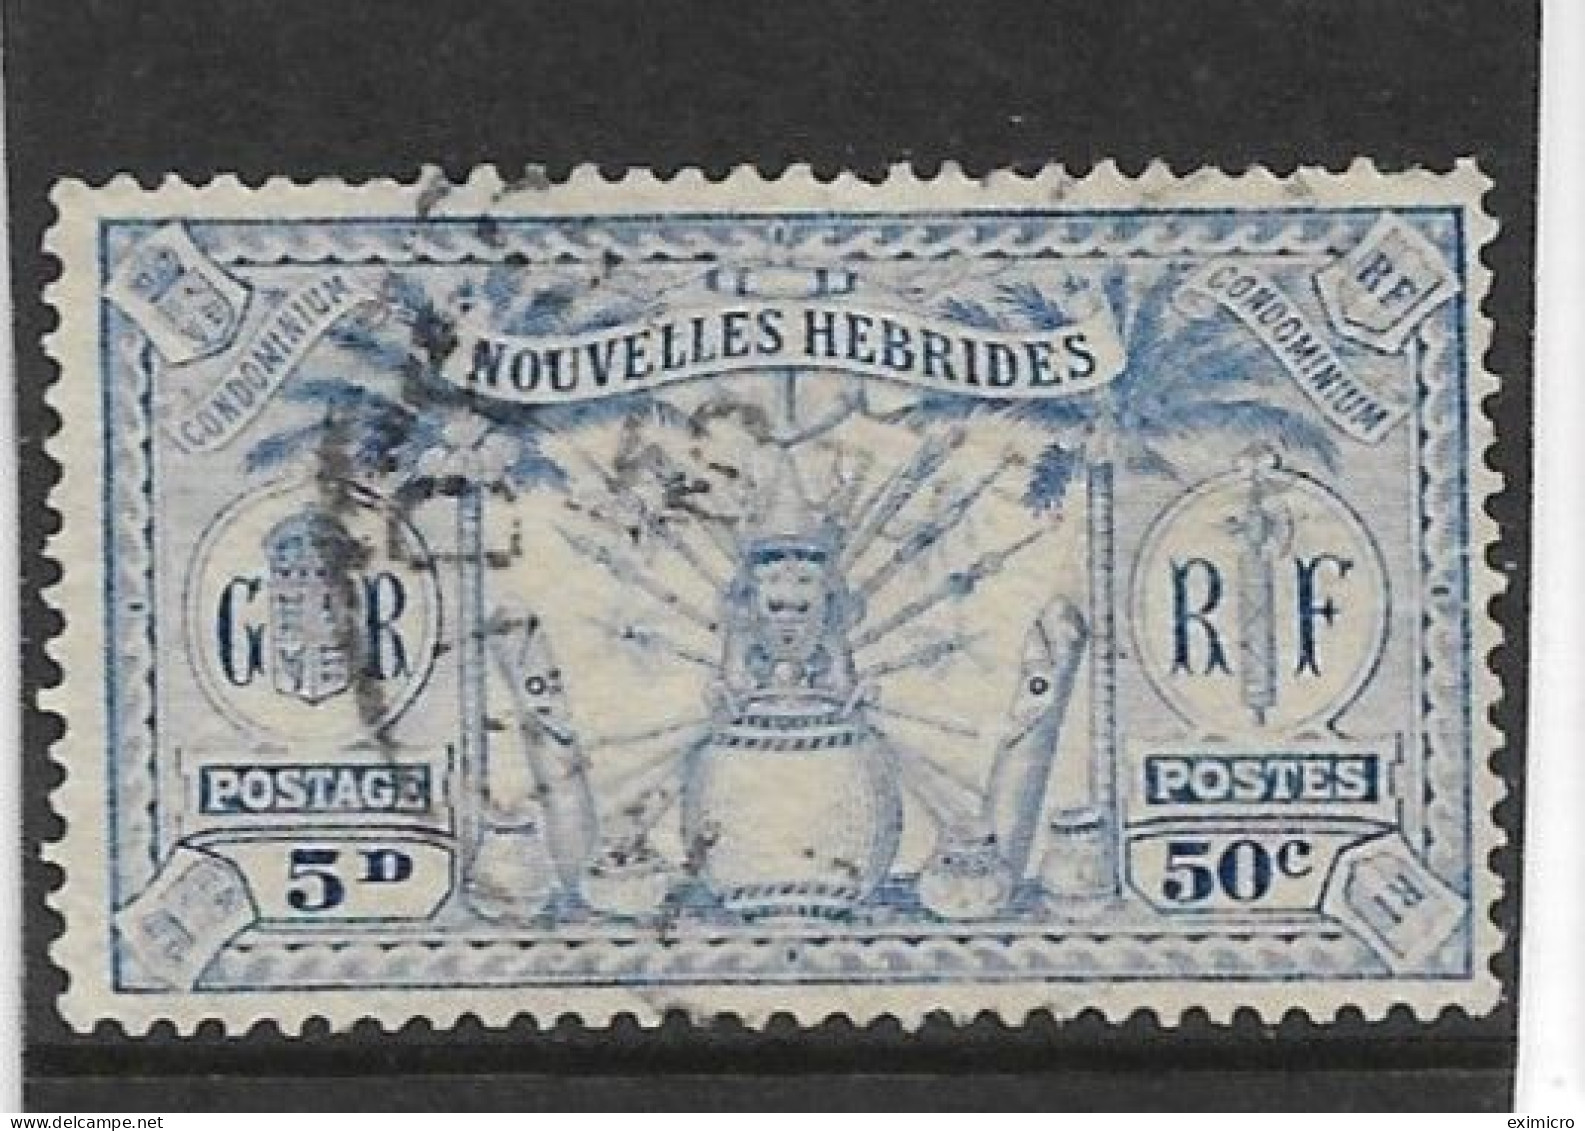 NEW HEBRIDES (FRENCH CURRENCY) 1925 50c (5d) SG F48 FINE USED Cat £3 - Gebraucht